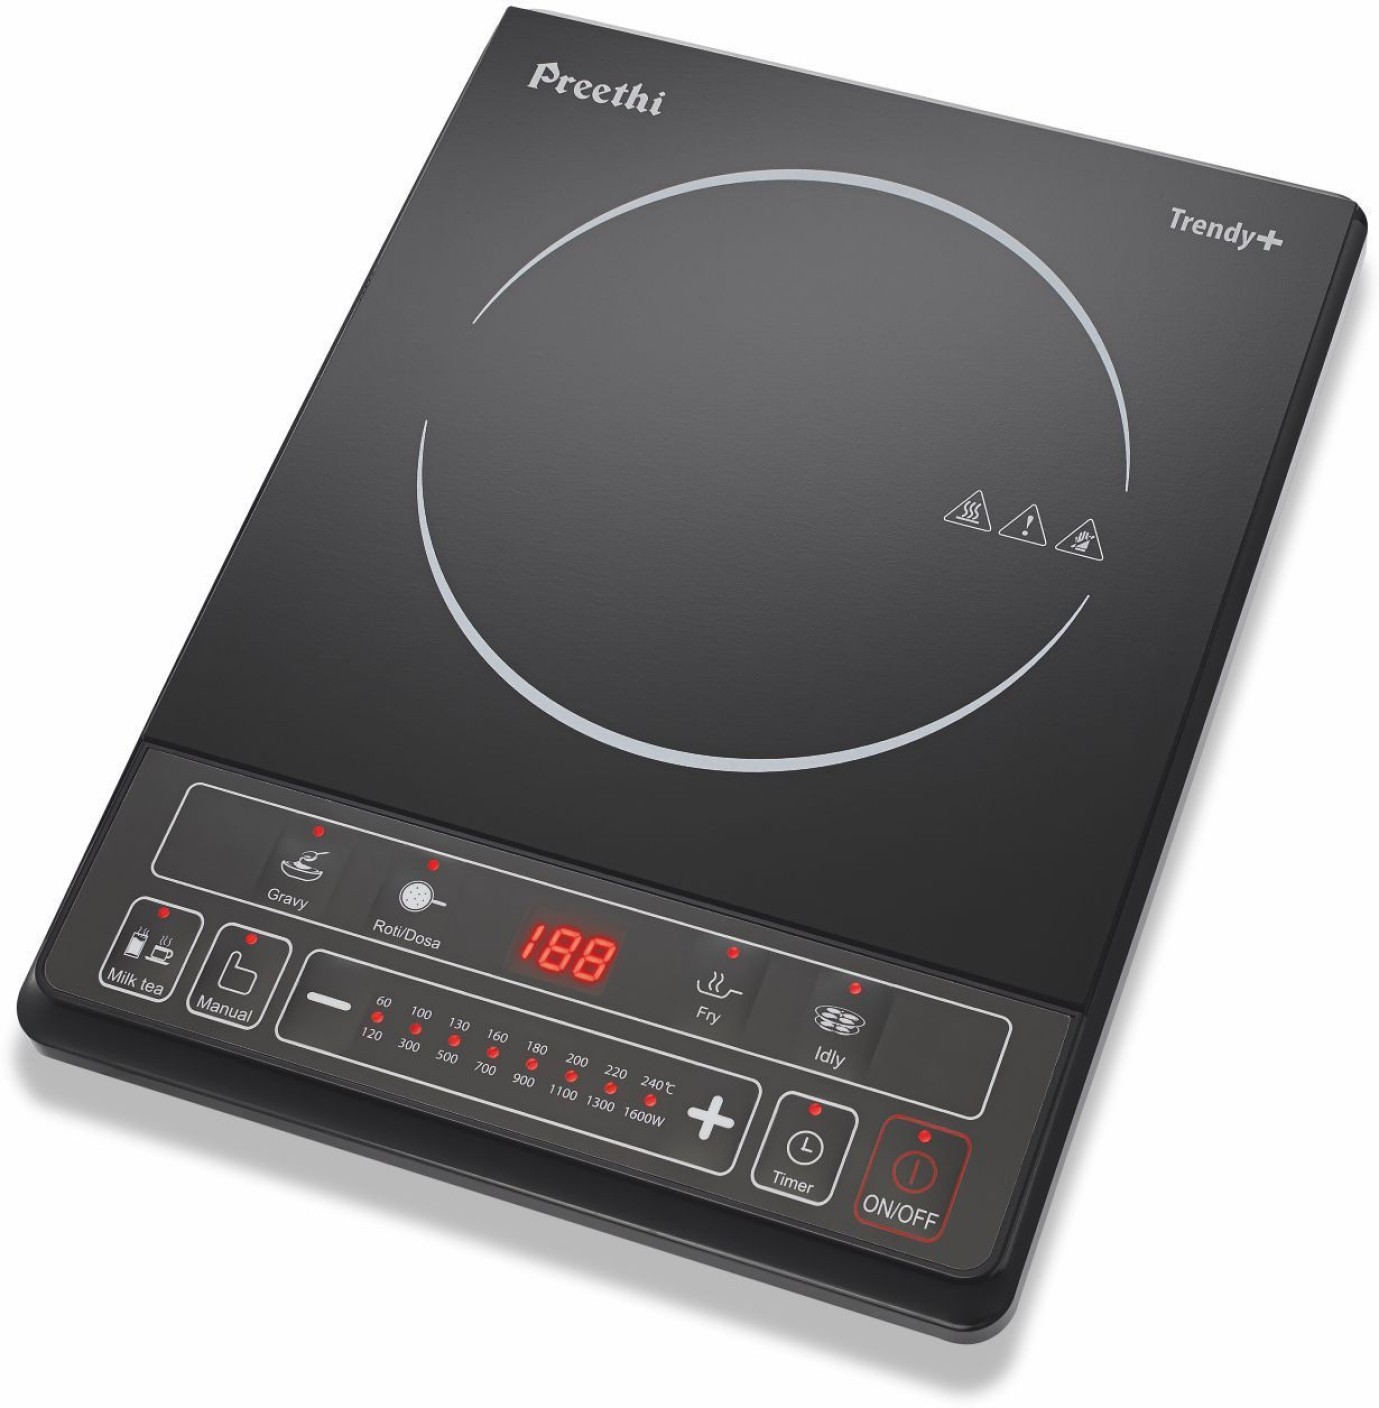 prestige-pic-15-induction-cooktop-buy-prestige-pic-15-induction